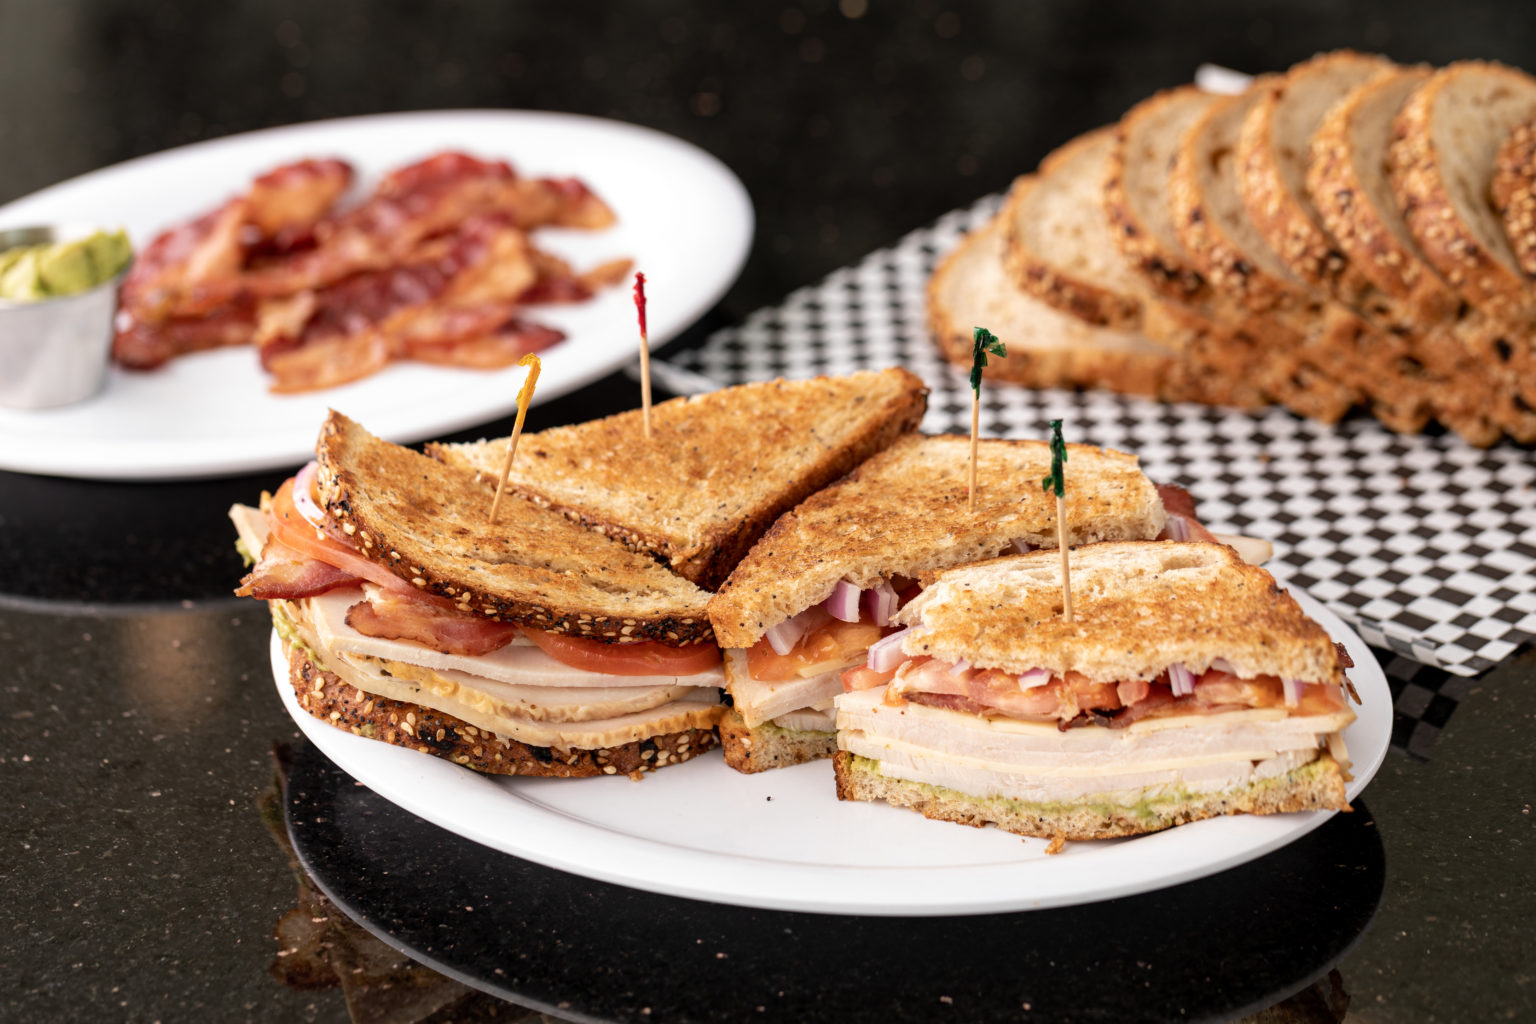 Sandwiches with bread, bacon, and avocado in the background